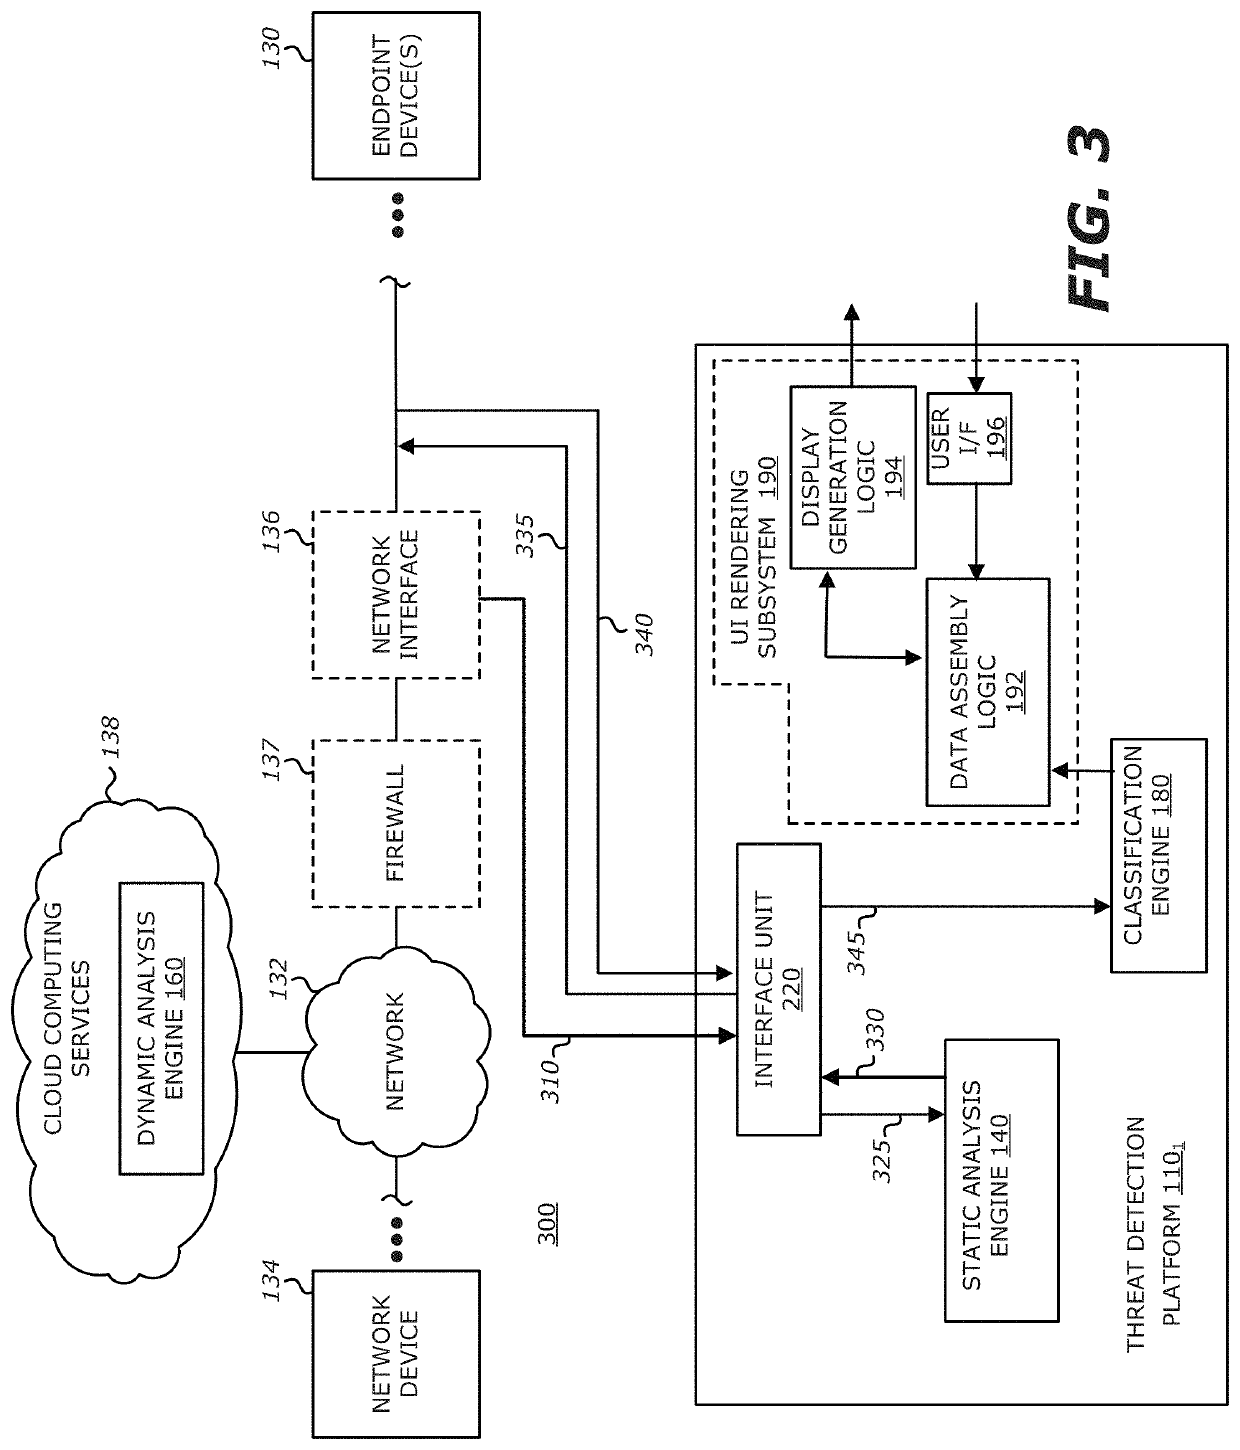 System and method for malware analysis using thread-level event monitoring